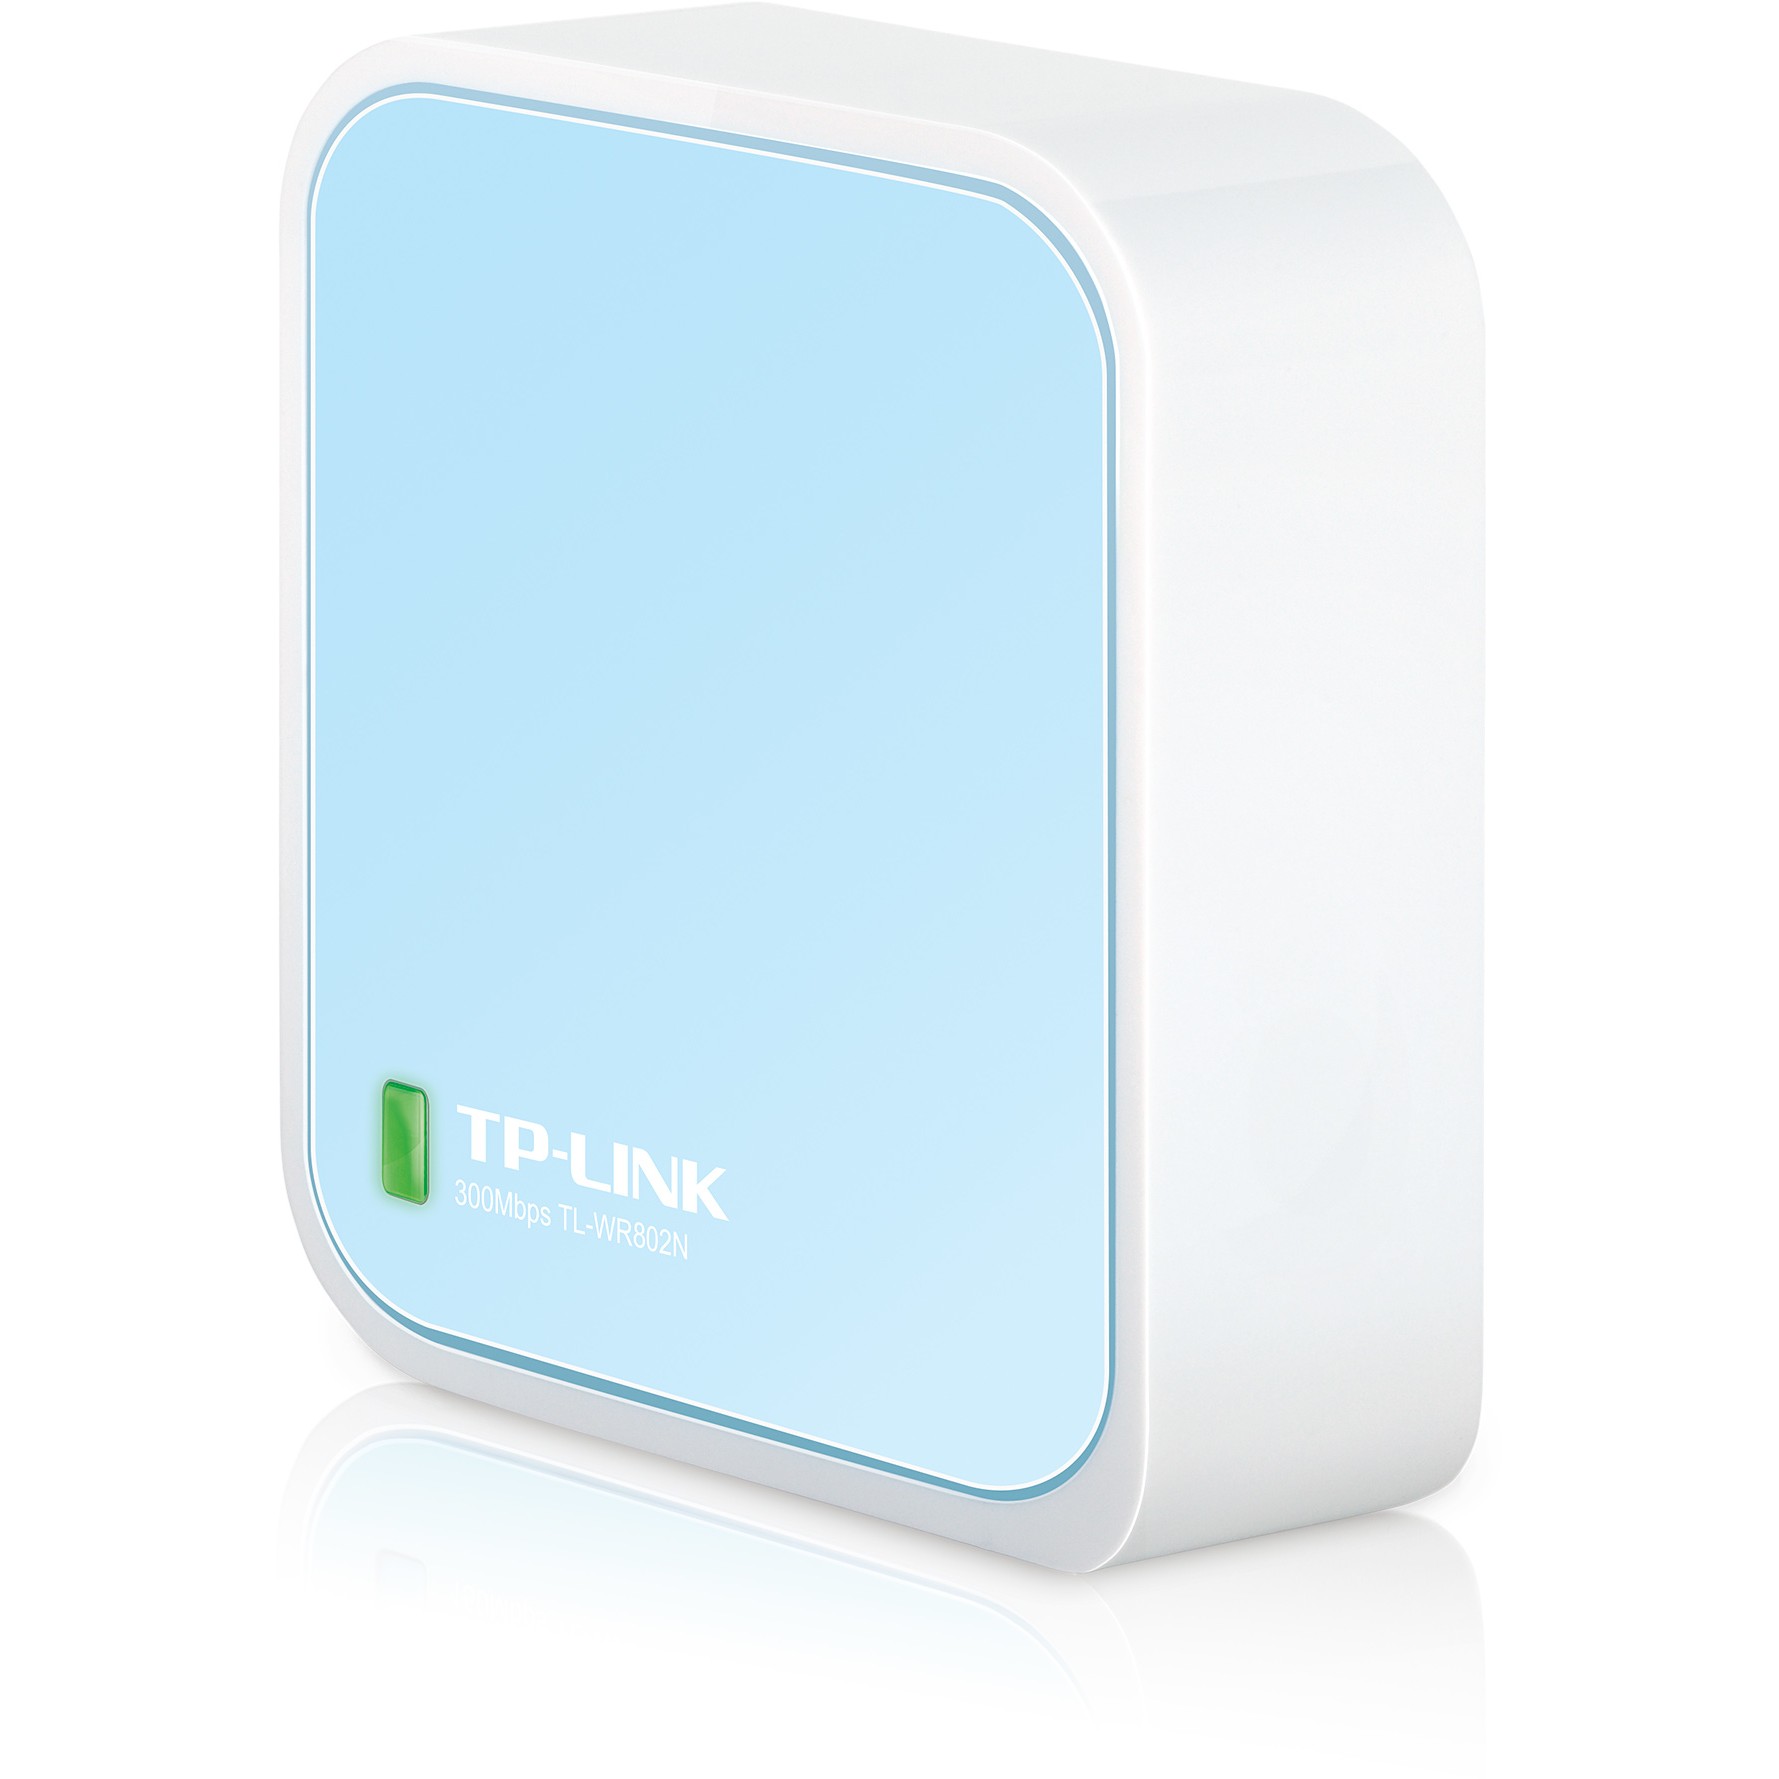 TP-Link TL-WR802N wireless router - WR802N